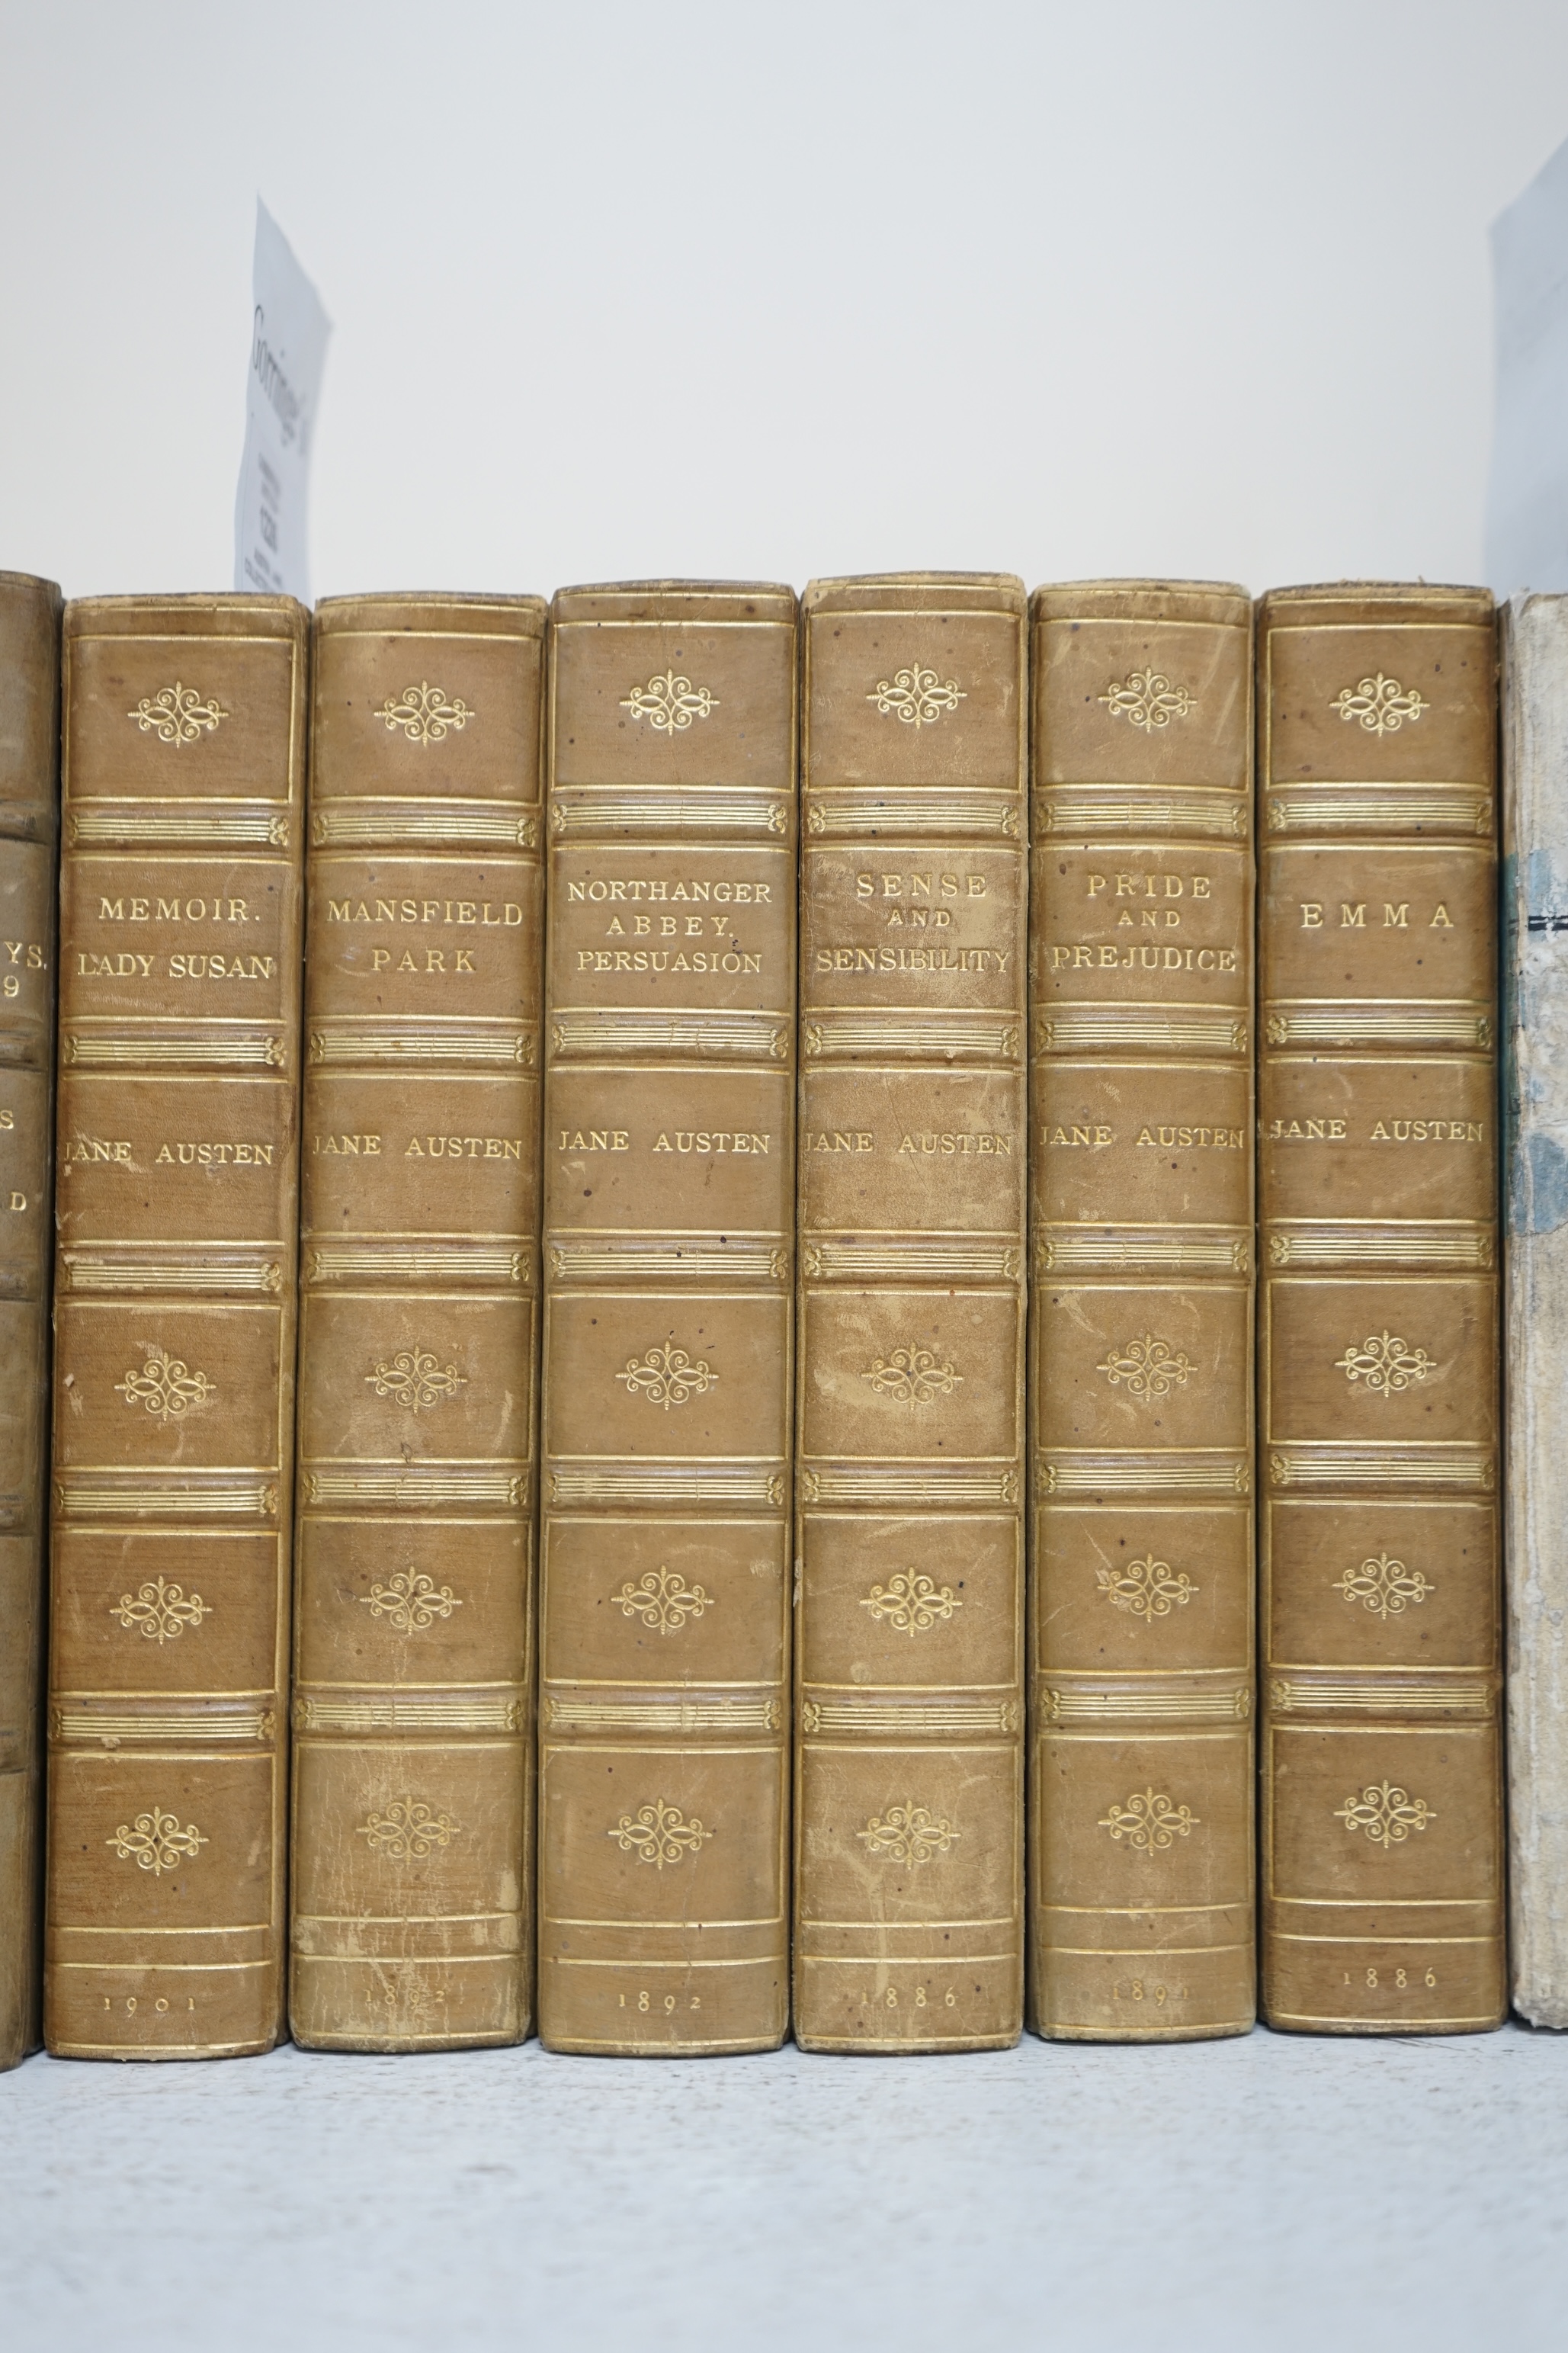 Austen, Jane - (Collected Novels). new editions, 5 vols. frontispieces; earlier 20th century green half calf and cloth, gilt decorated panelled spines, gilt tops, marbled e/ps. (by Spottiswoode & Co). Richard Bentley, 18